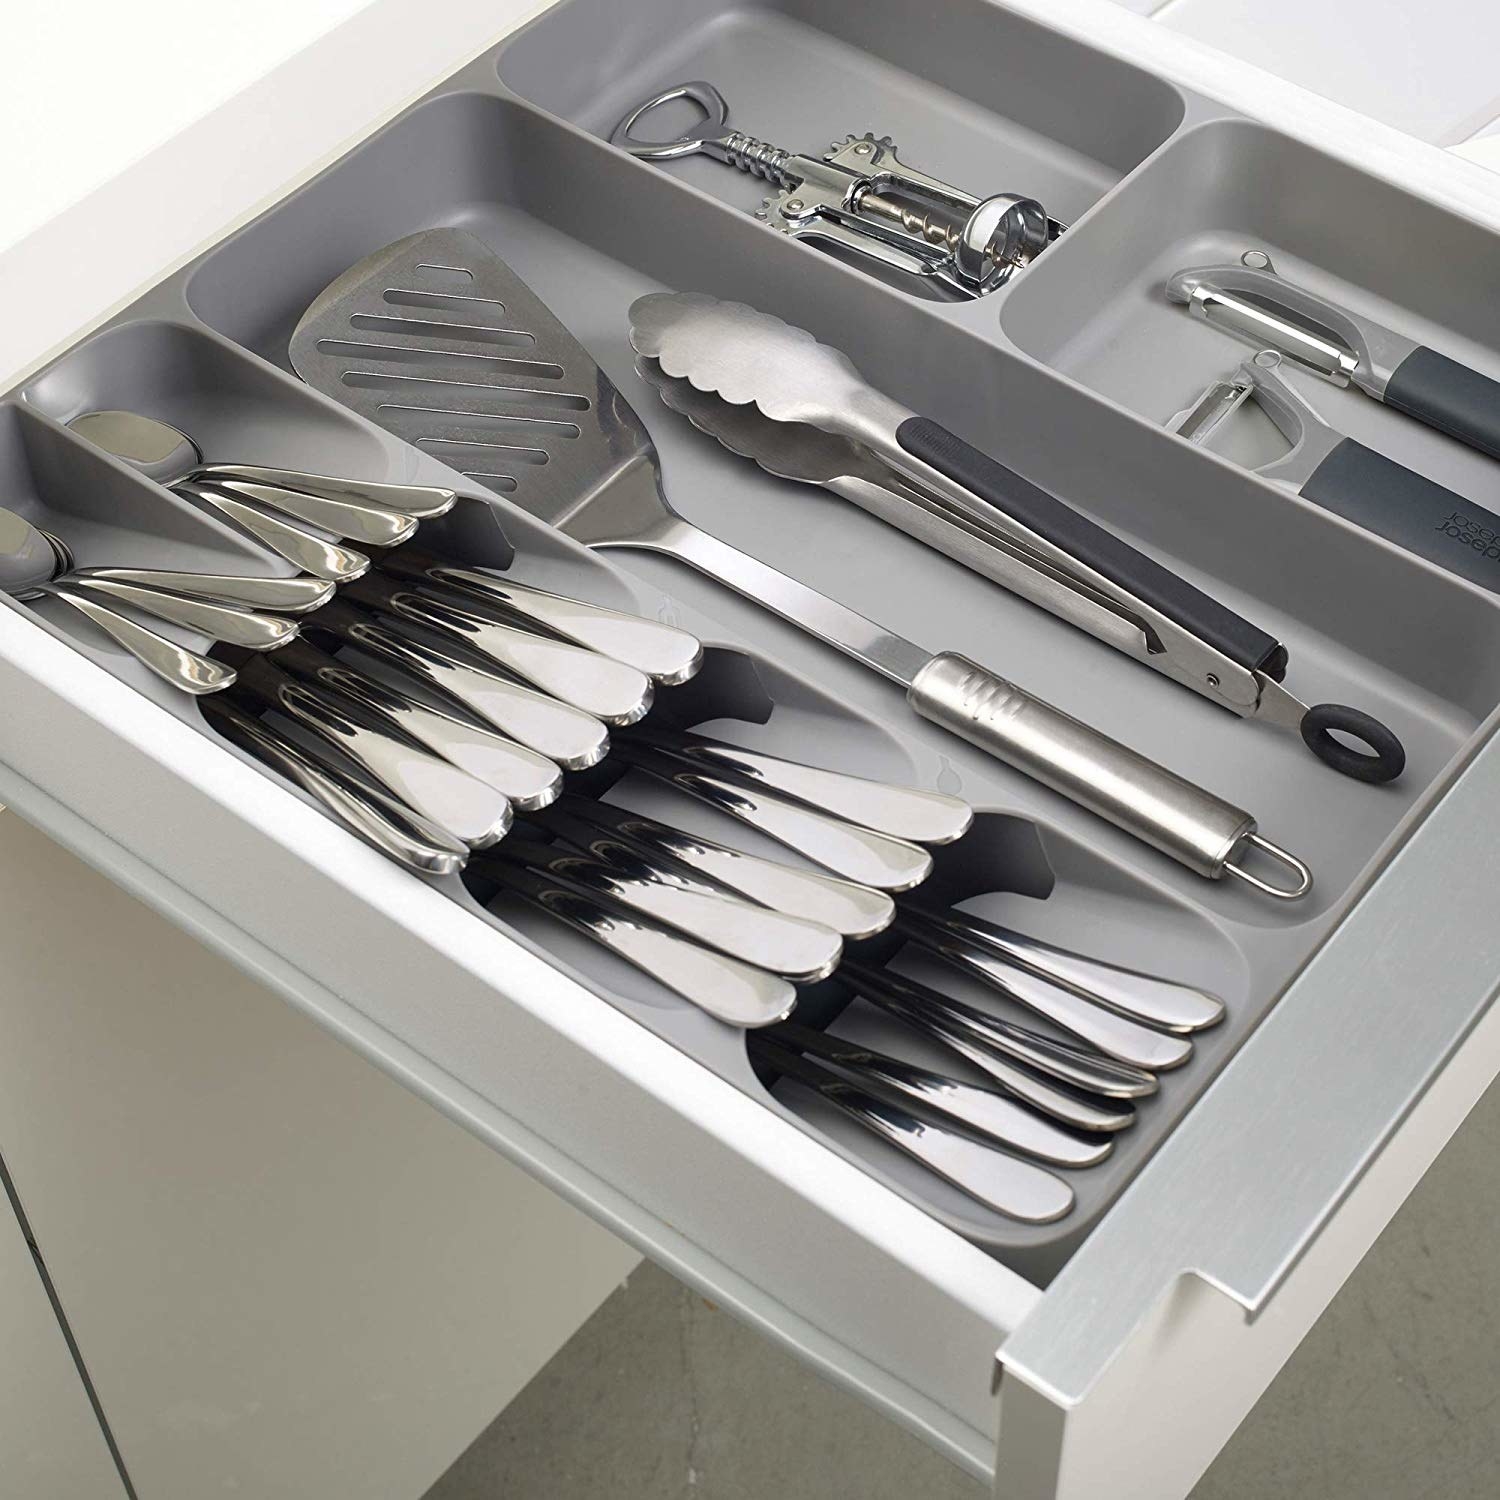 the cutlery tray holding a spatula a pair of tongs a can opener and various utensils